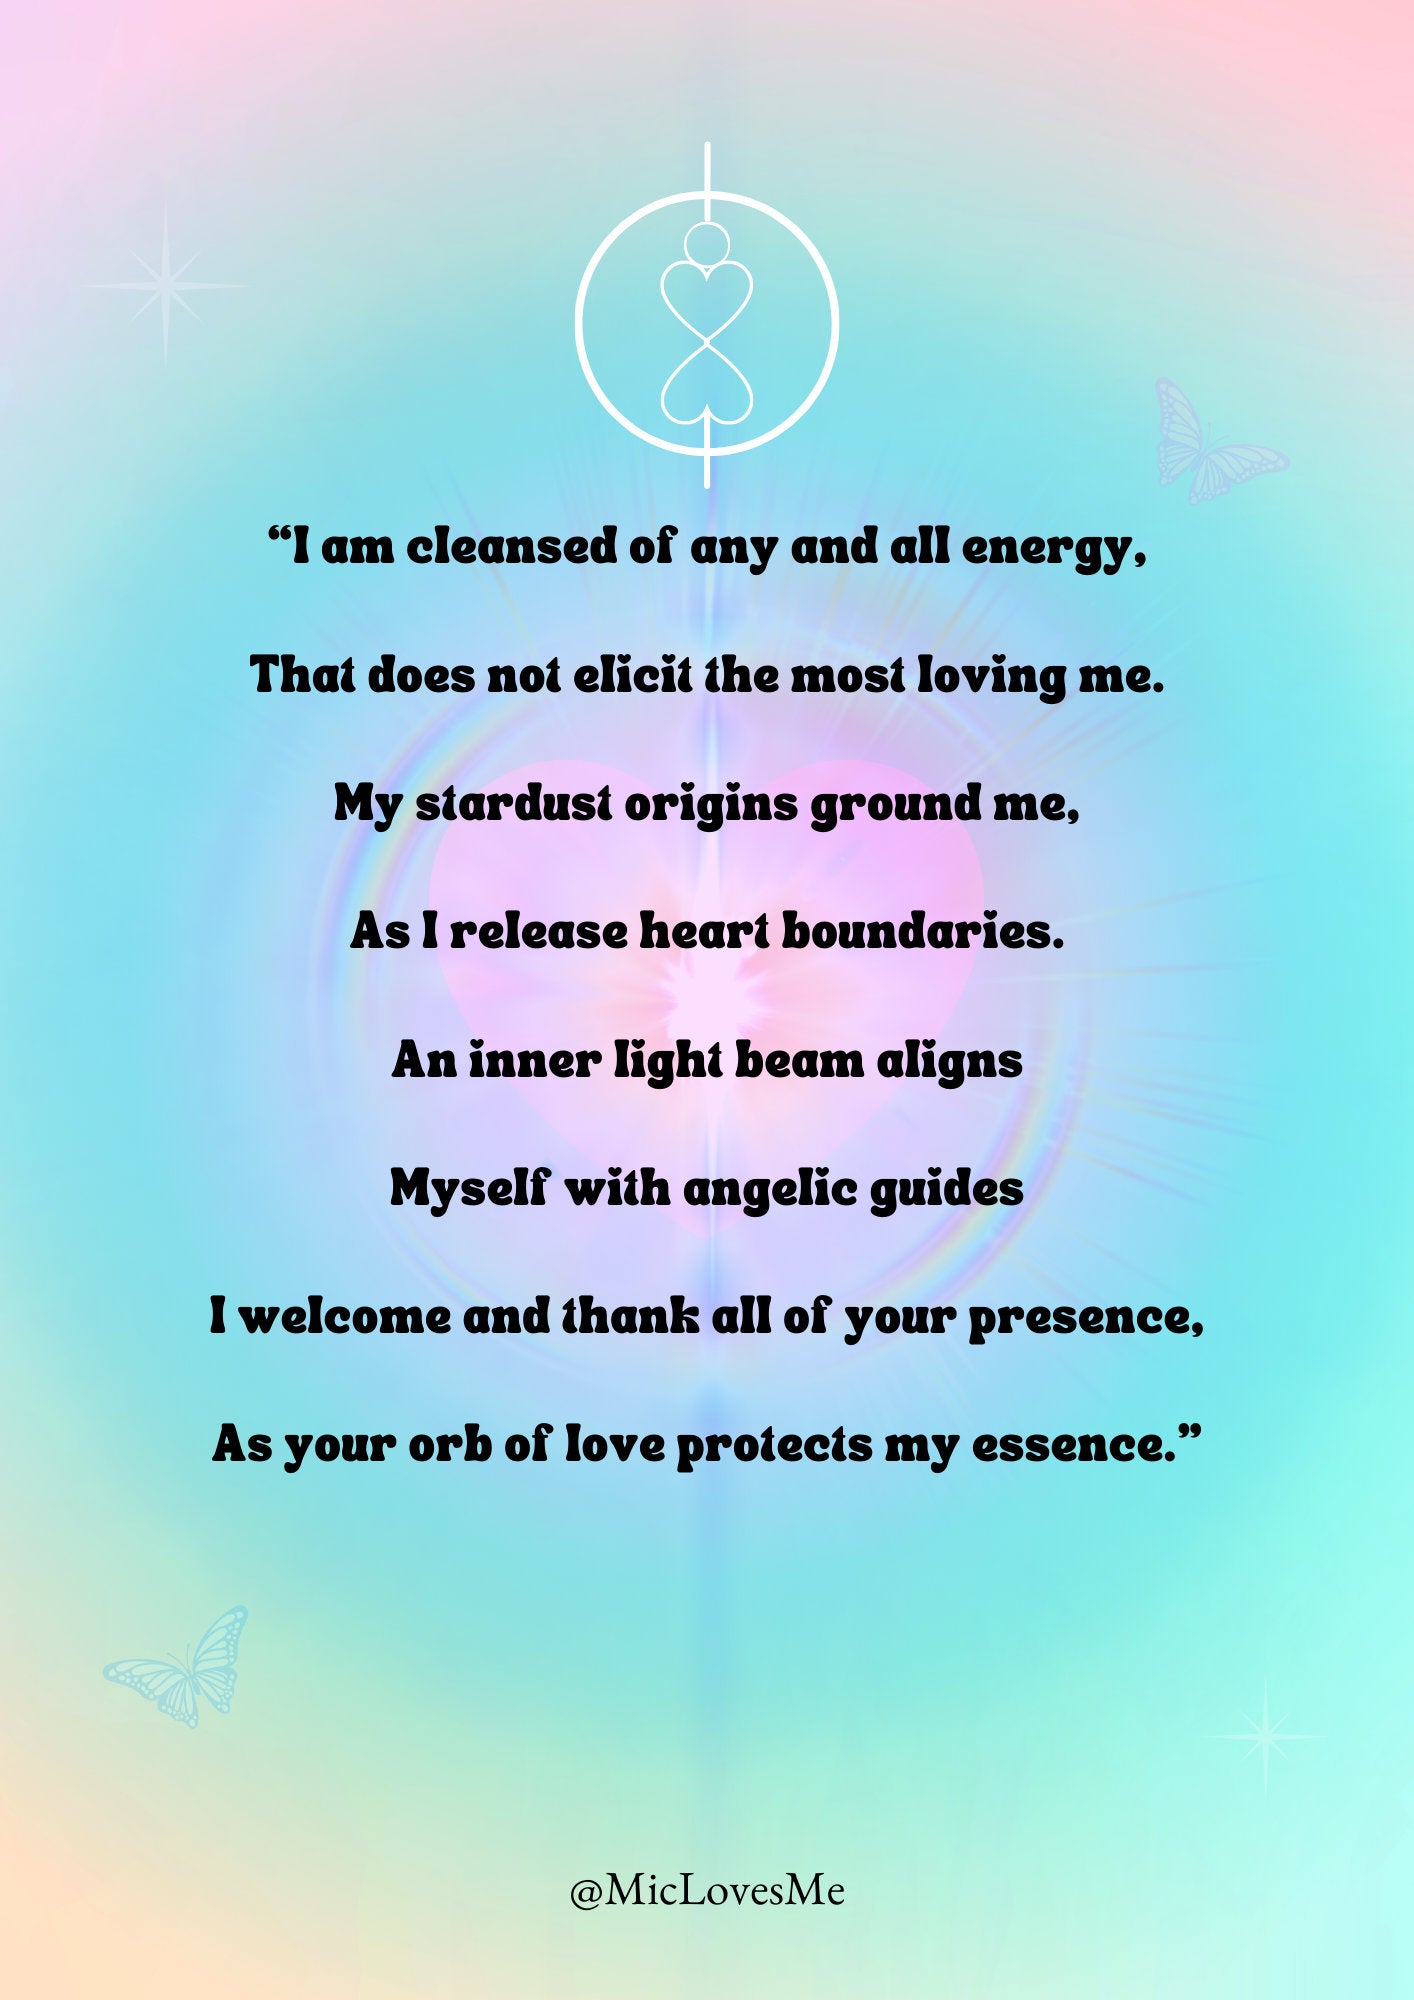 Meditation / Affirmation Posters Mix and Match!